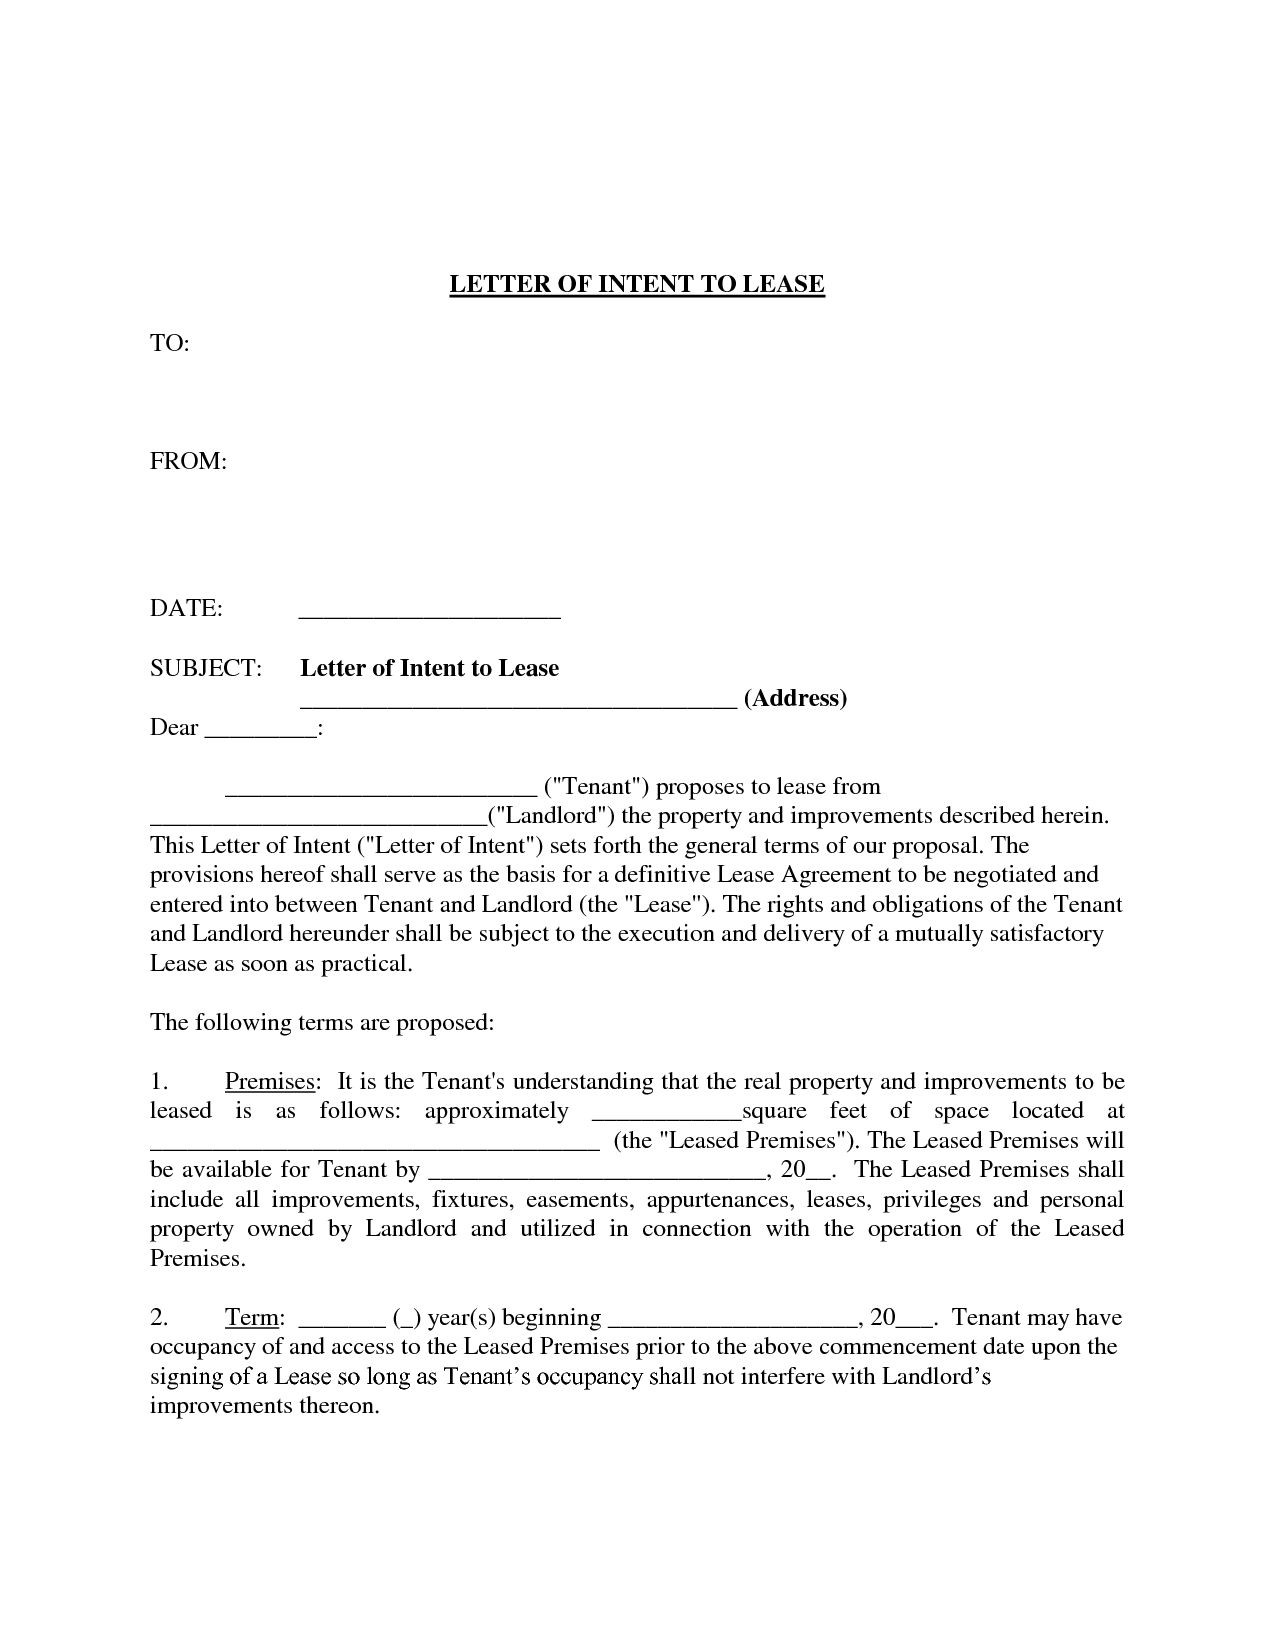 Letter Of Intent Lease Template - Templatemercial Real Estate Letter Intent to Lease for Space